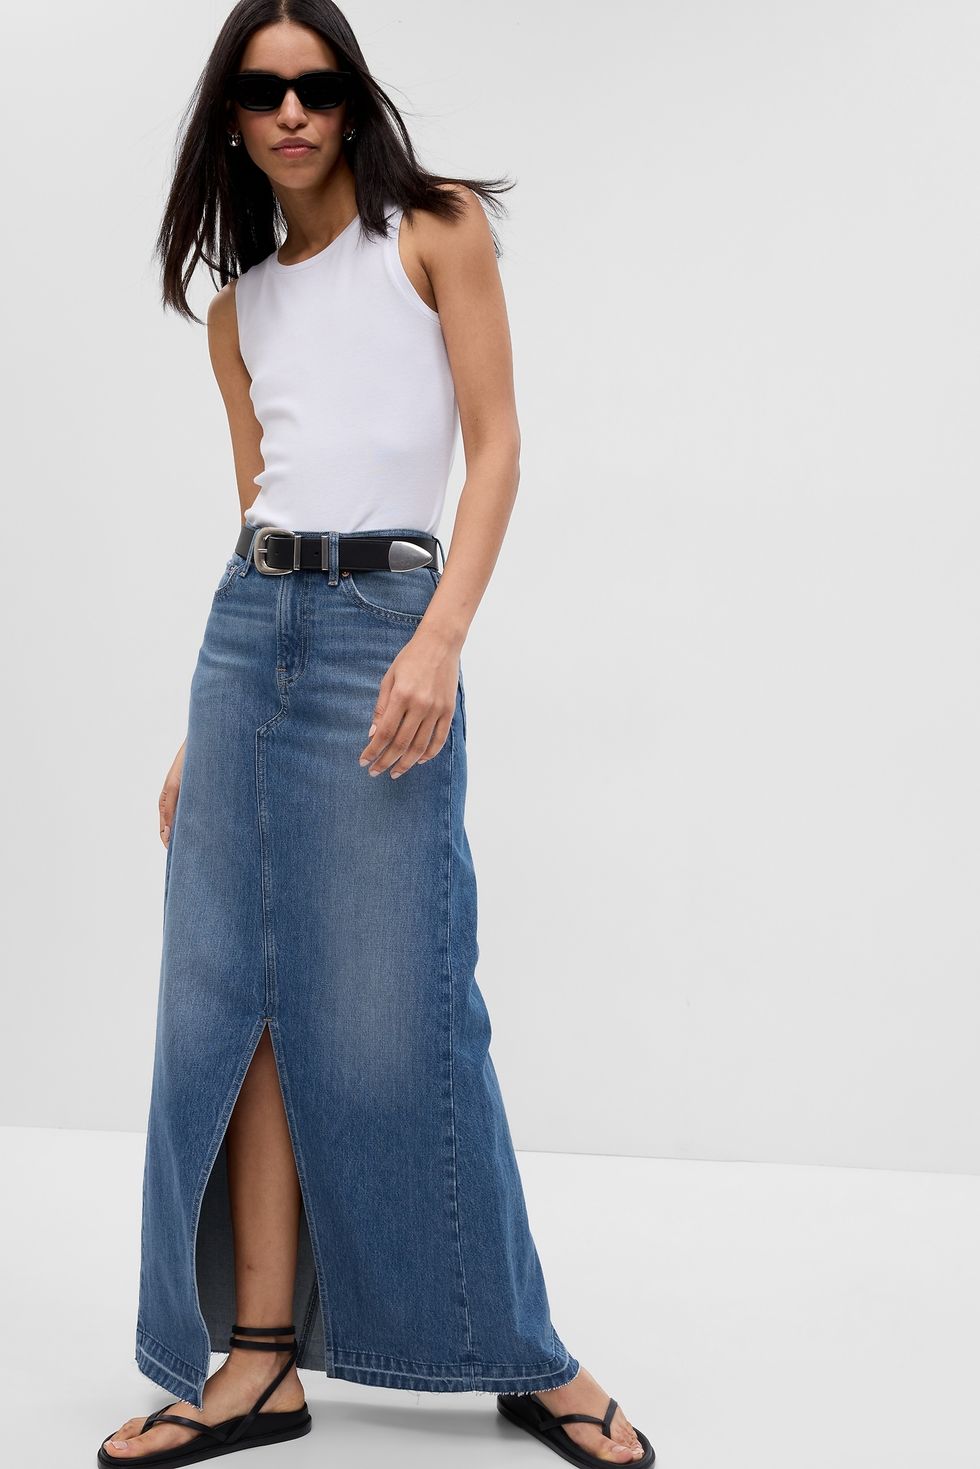 10 Best Jean Skirt Outfits for the Days You Want to Show Off Your ...